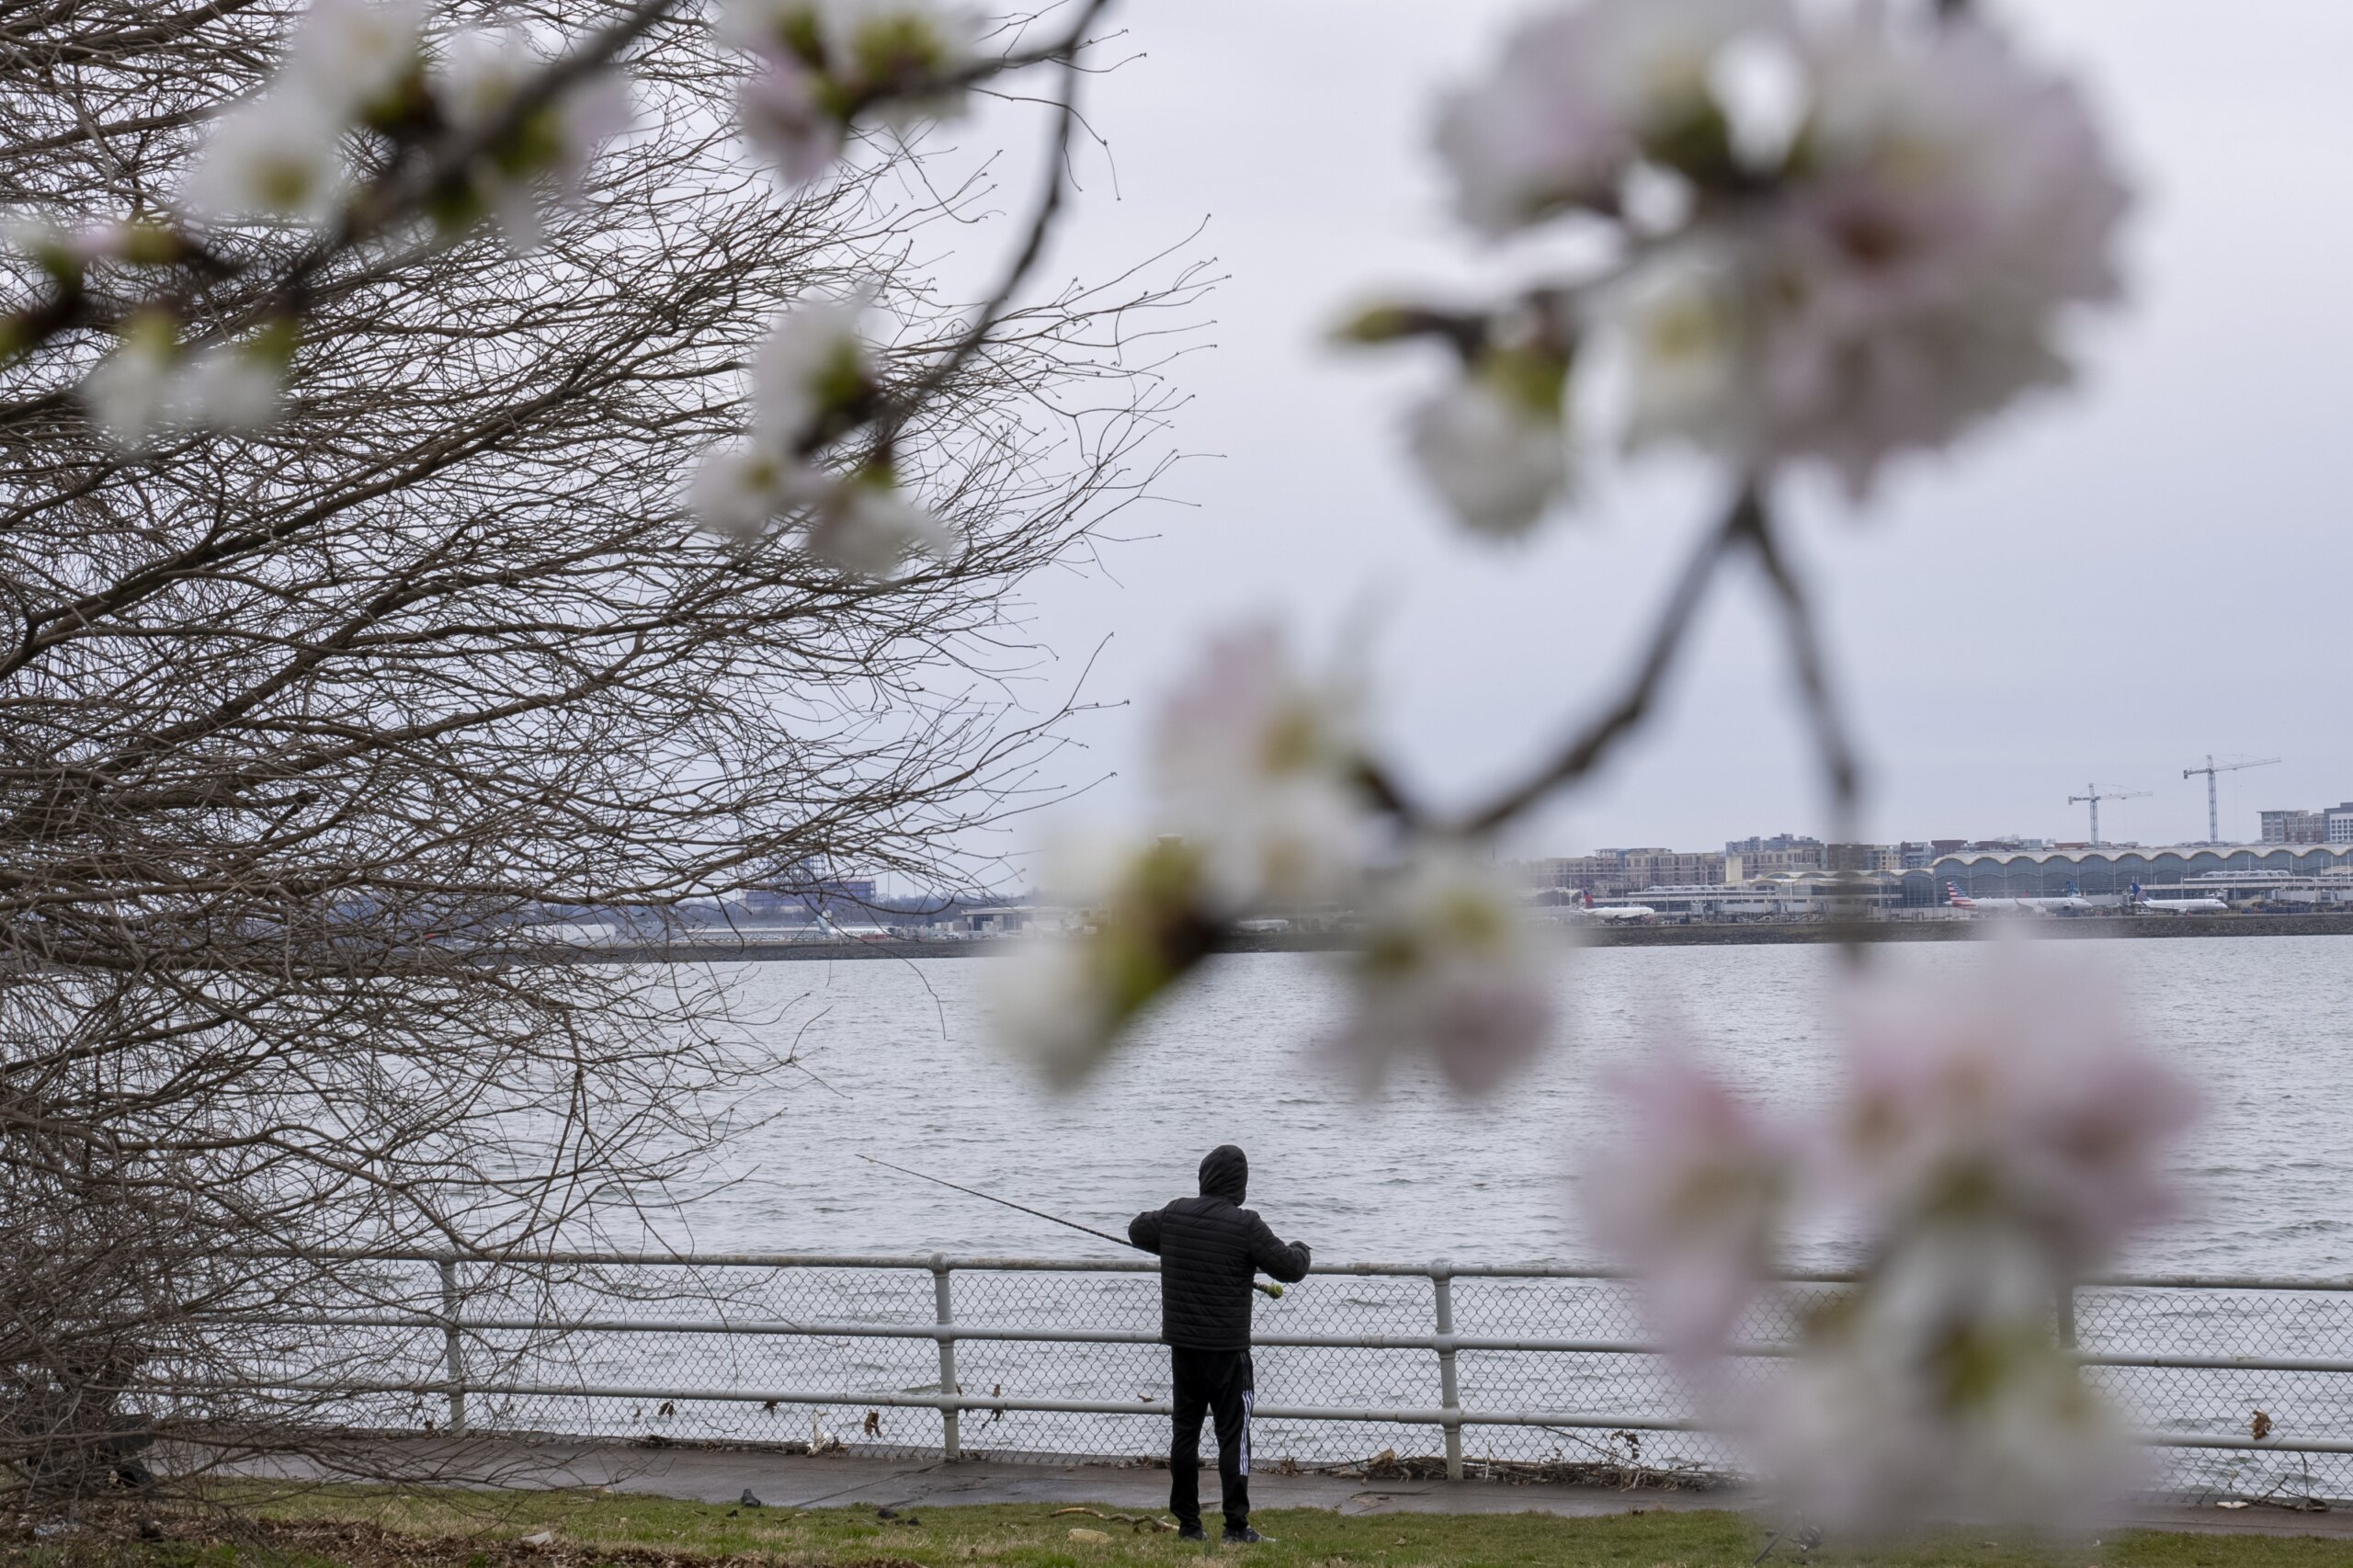 Blossom watch DC cherry trees reach 2nd stage as officials predict